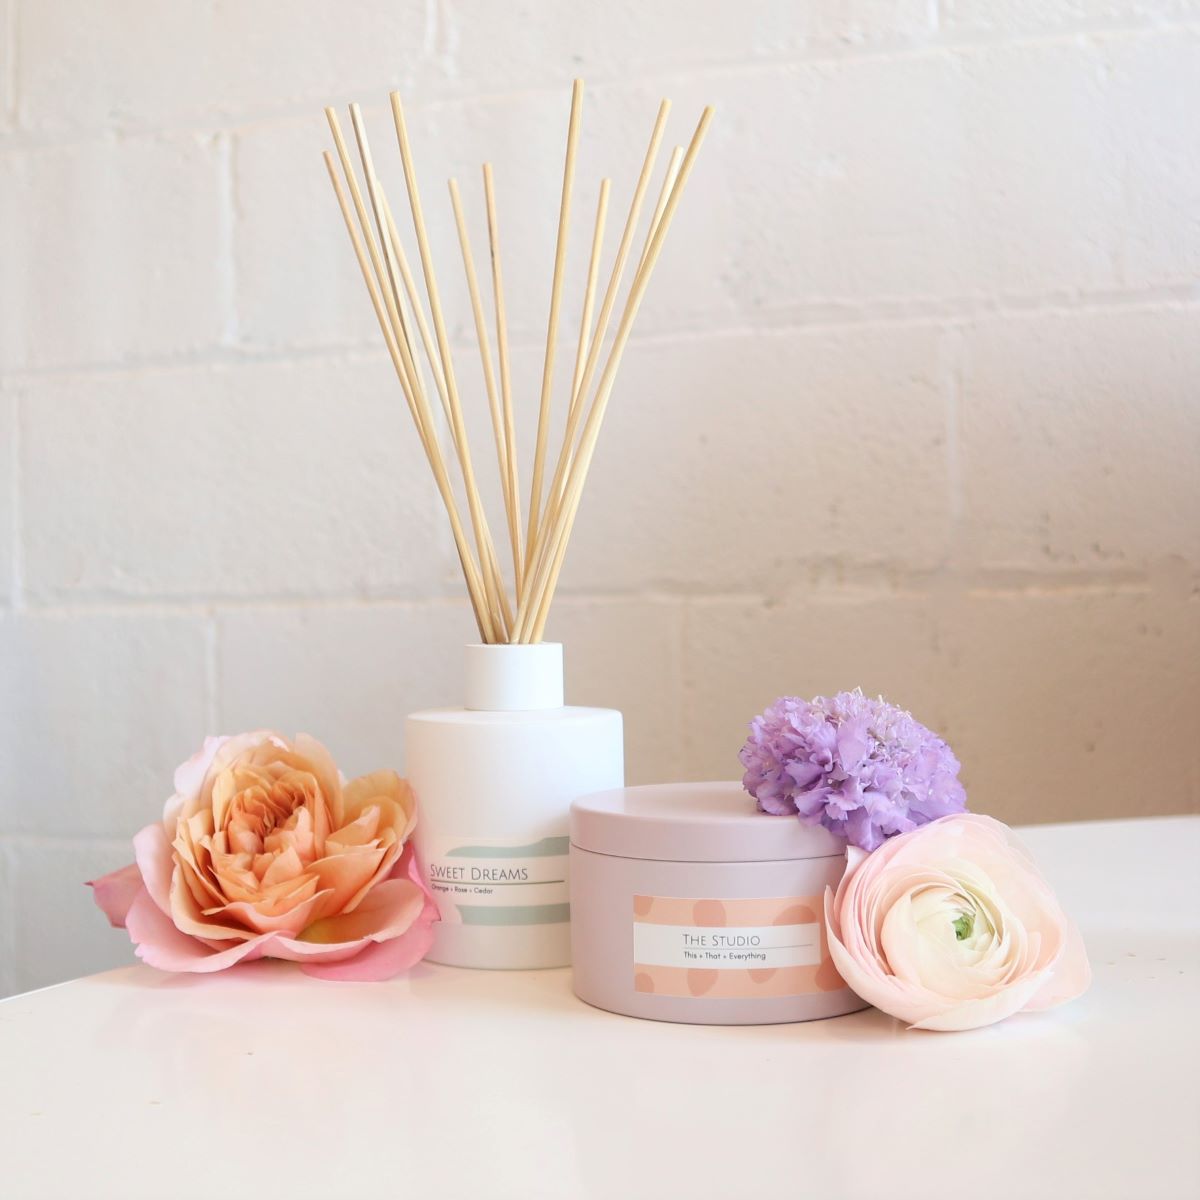 The Fleurish co diffuser and candle 